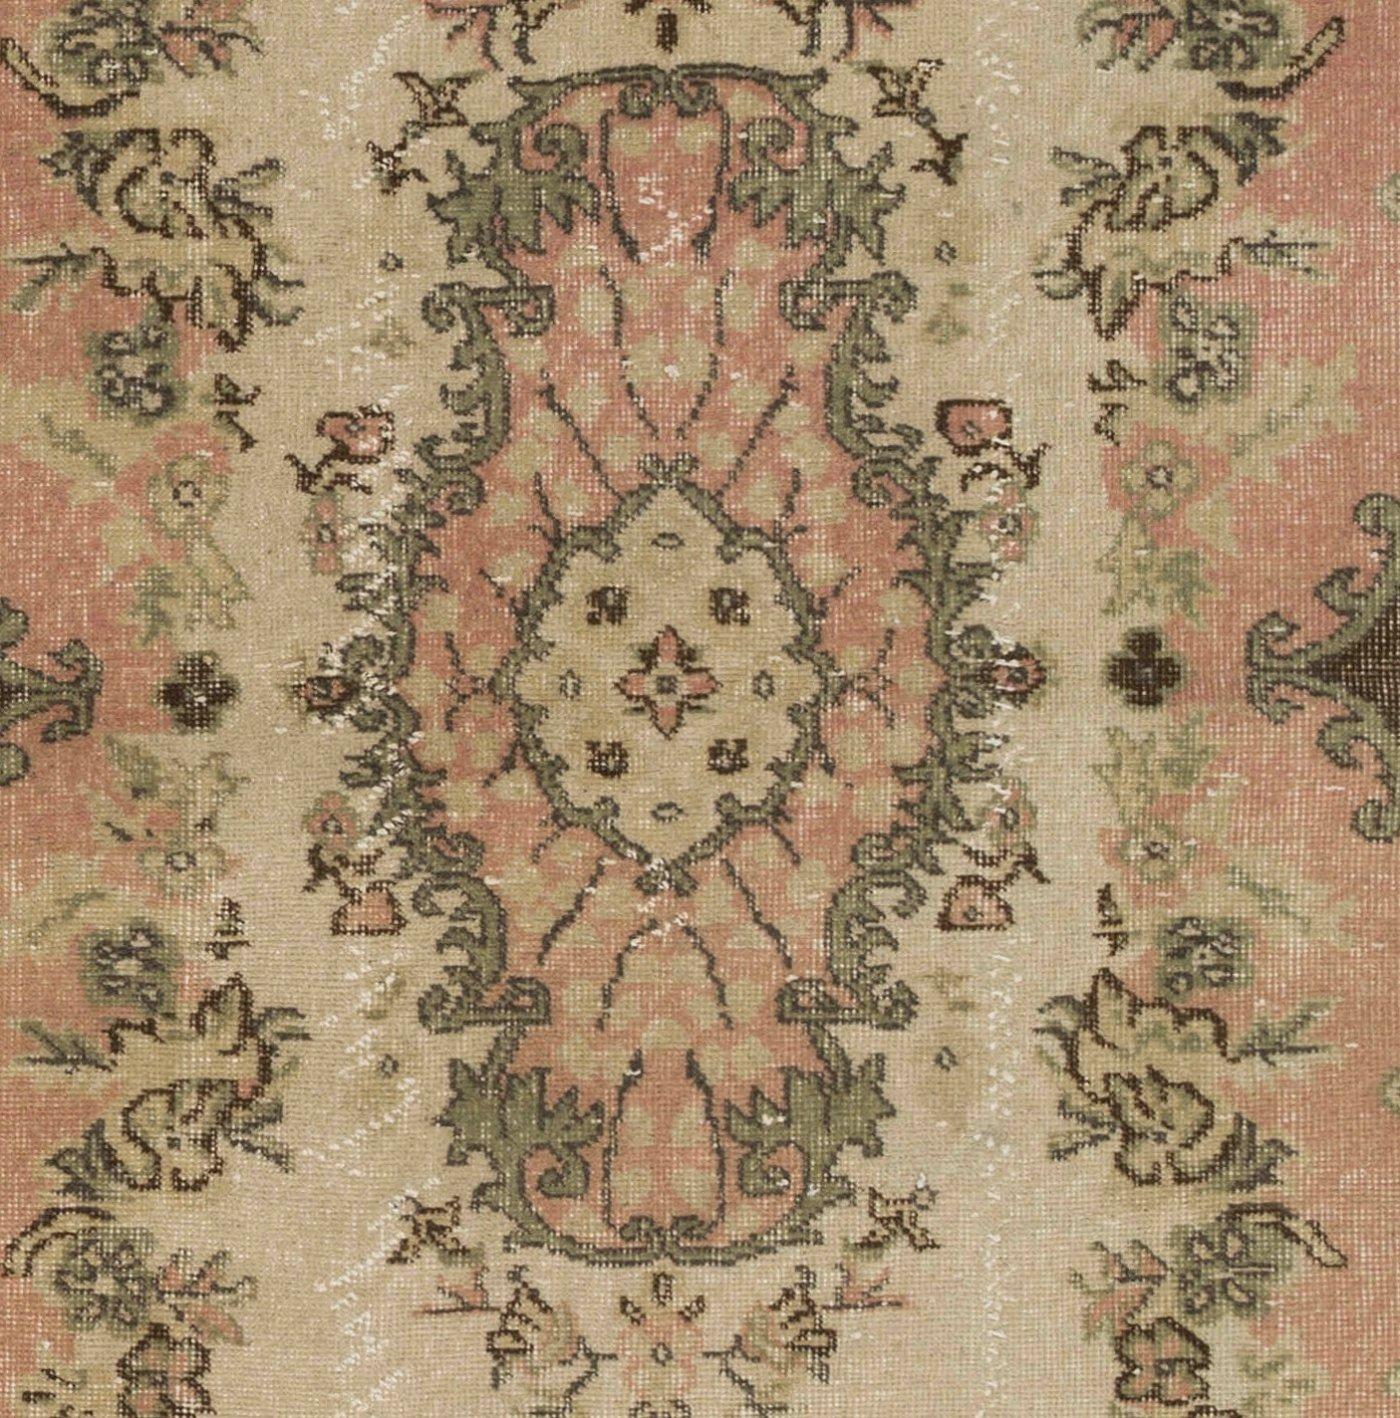 4x7.2 Ft Vintage Hand-Knotted Turkish Rug in Beige, Green, Pink & Brown Colors In Good Condition For Sale In Philadelphia, PA